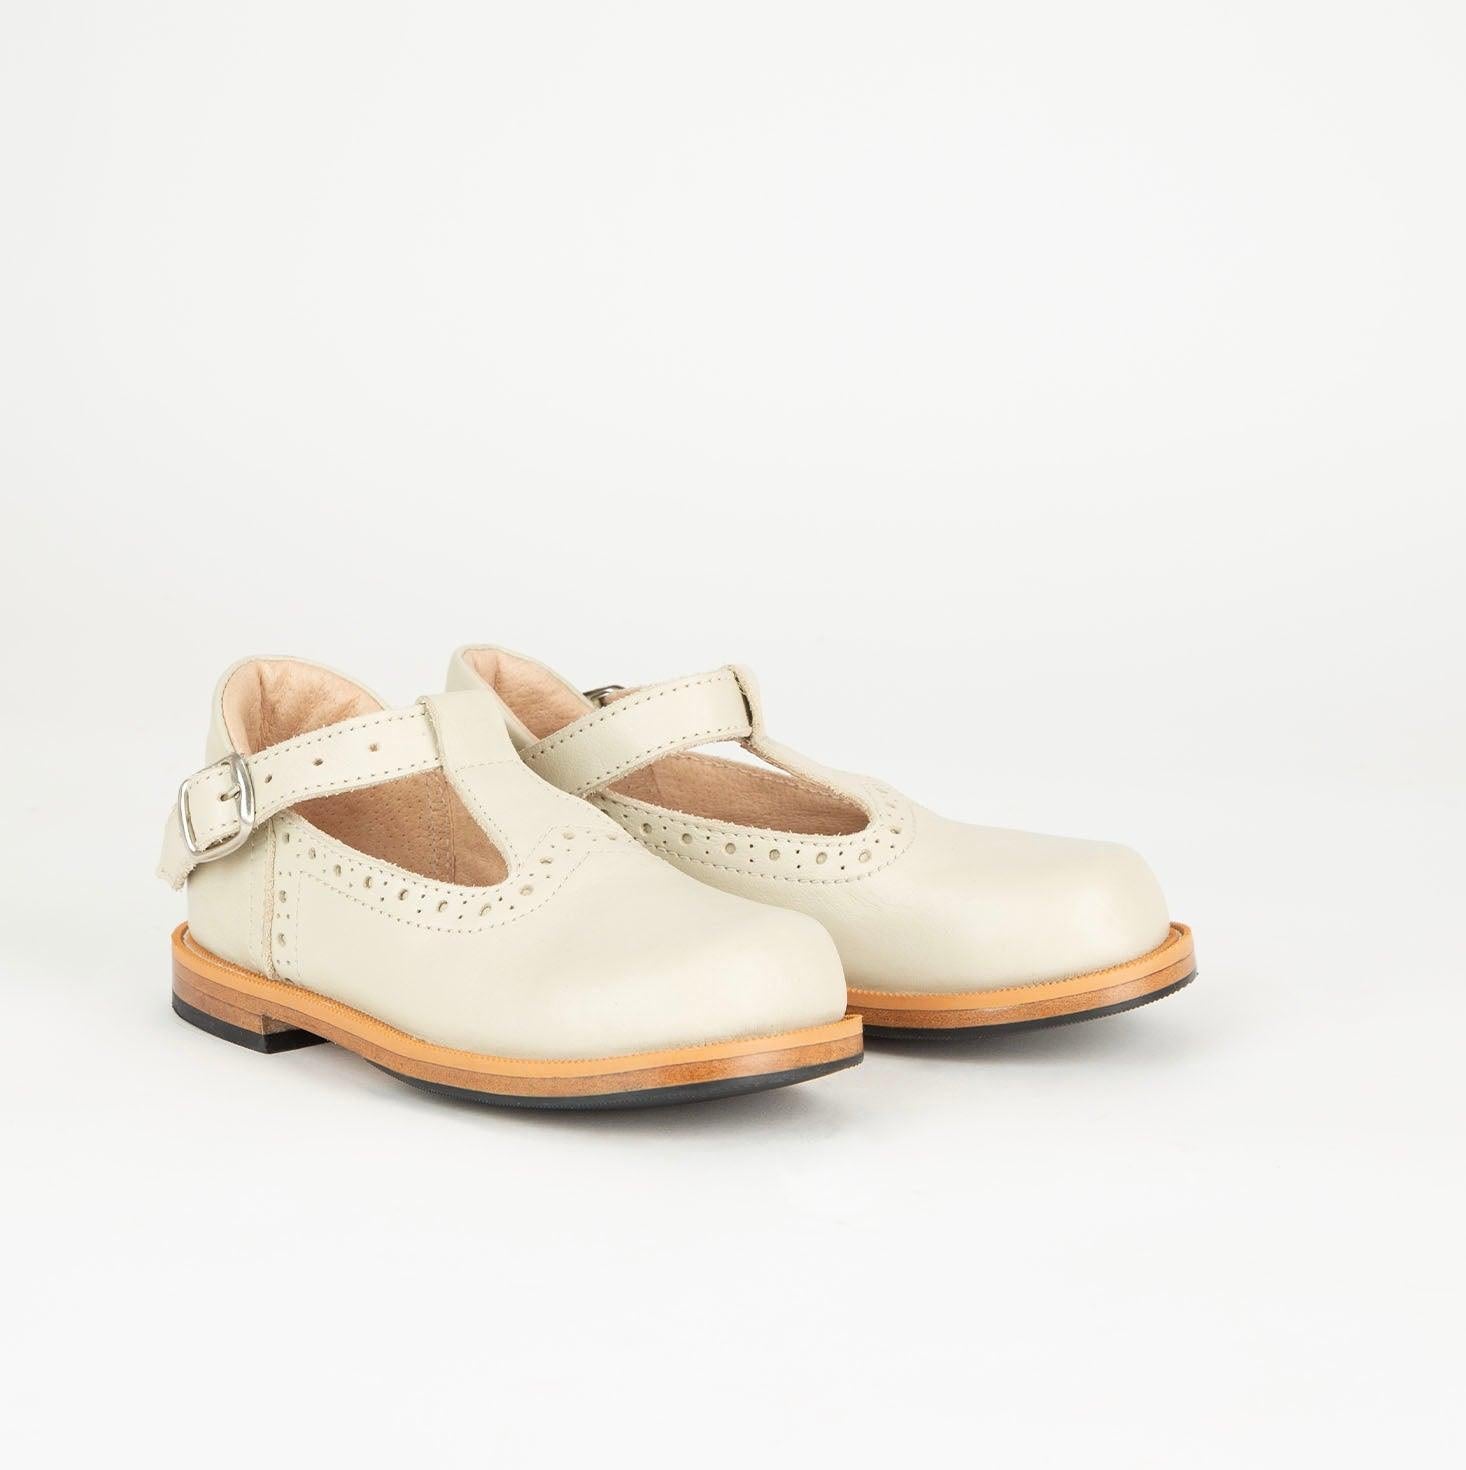 MK22755 - Janes Shoes Shoes] | Sustainable Fashion made by artisans